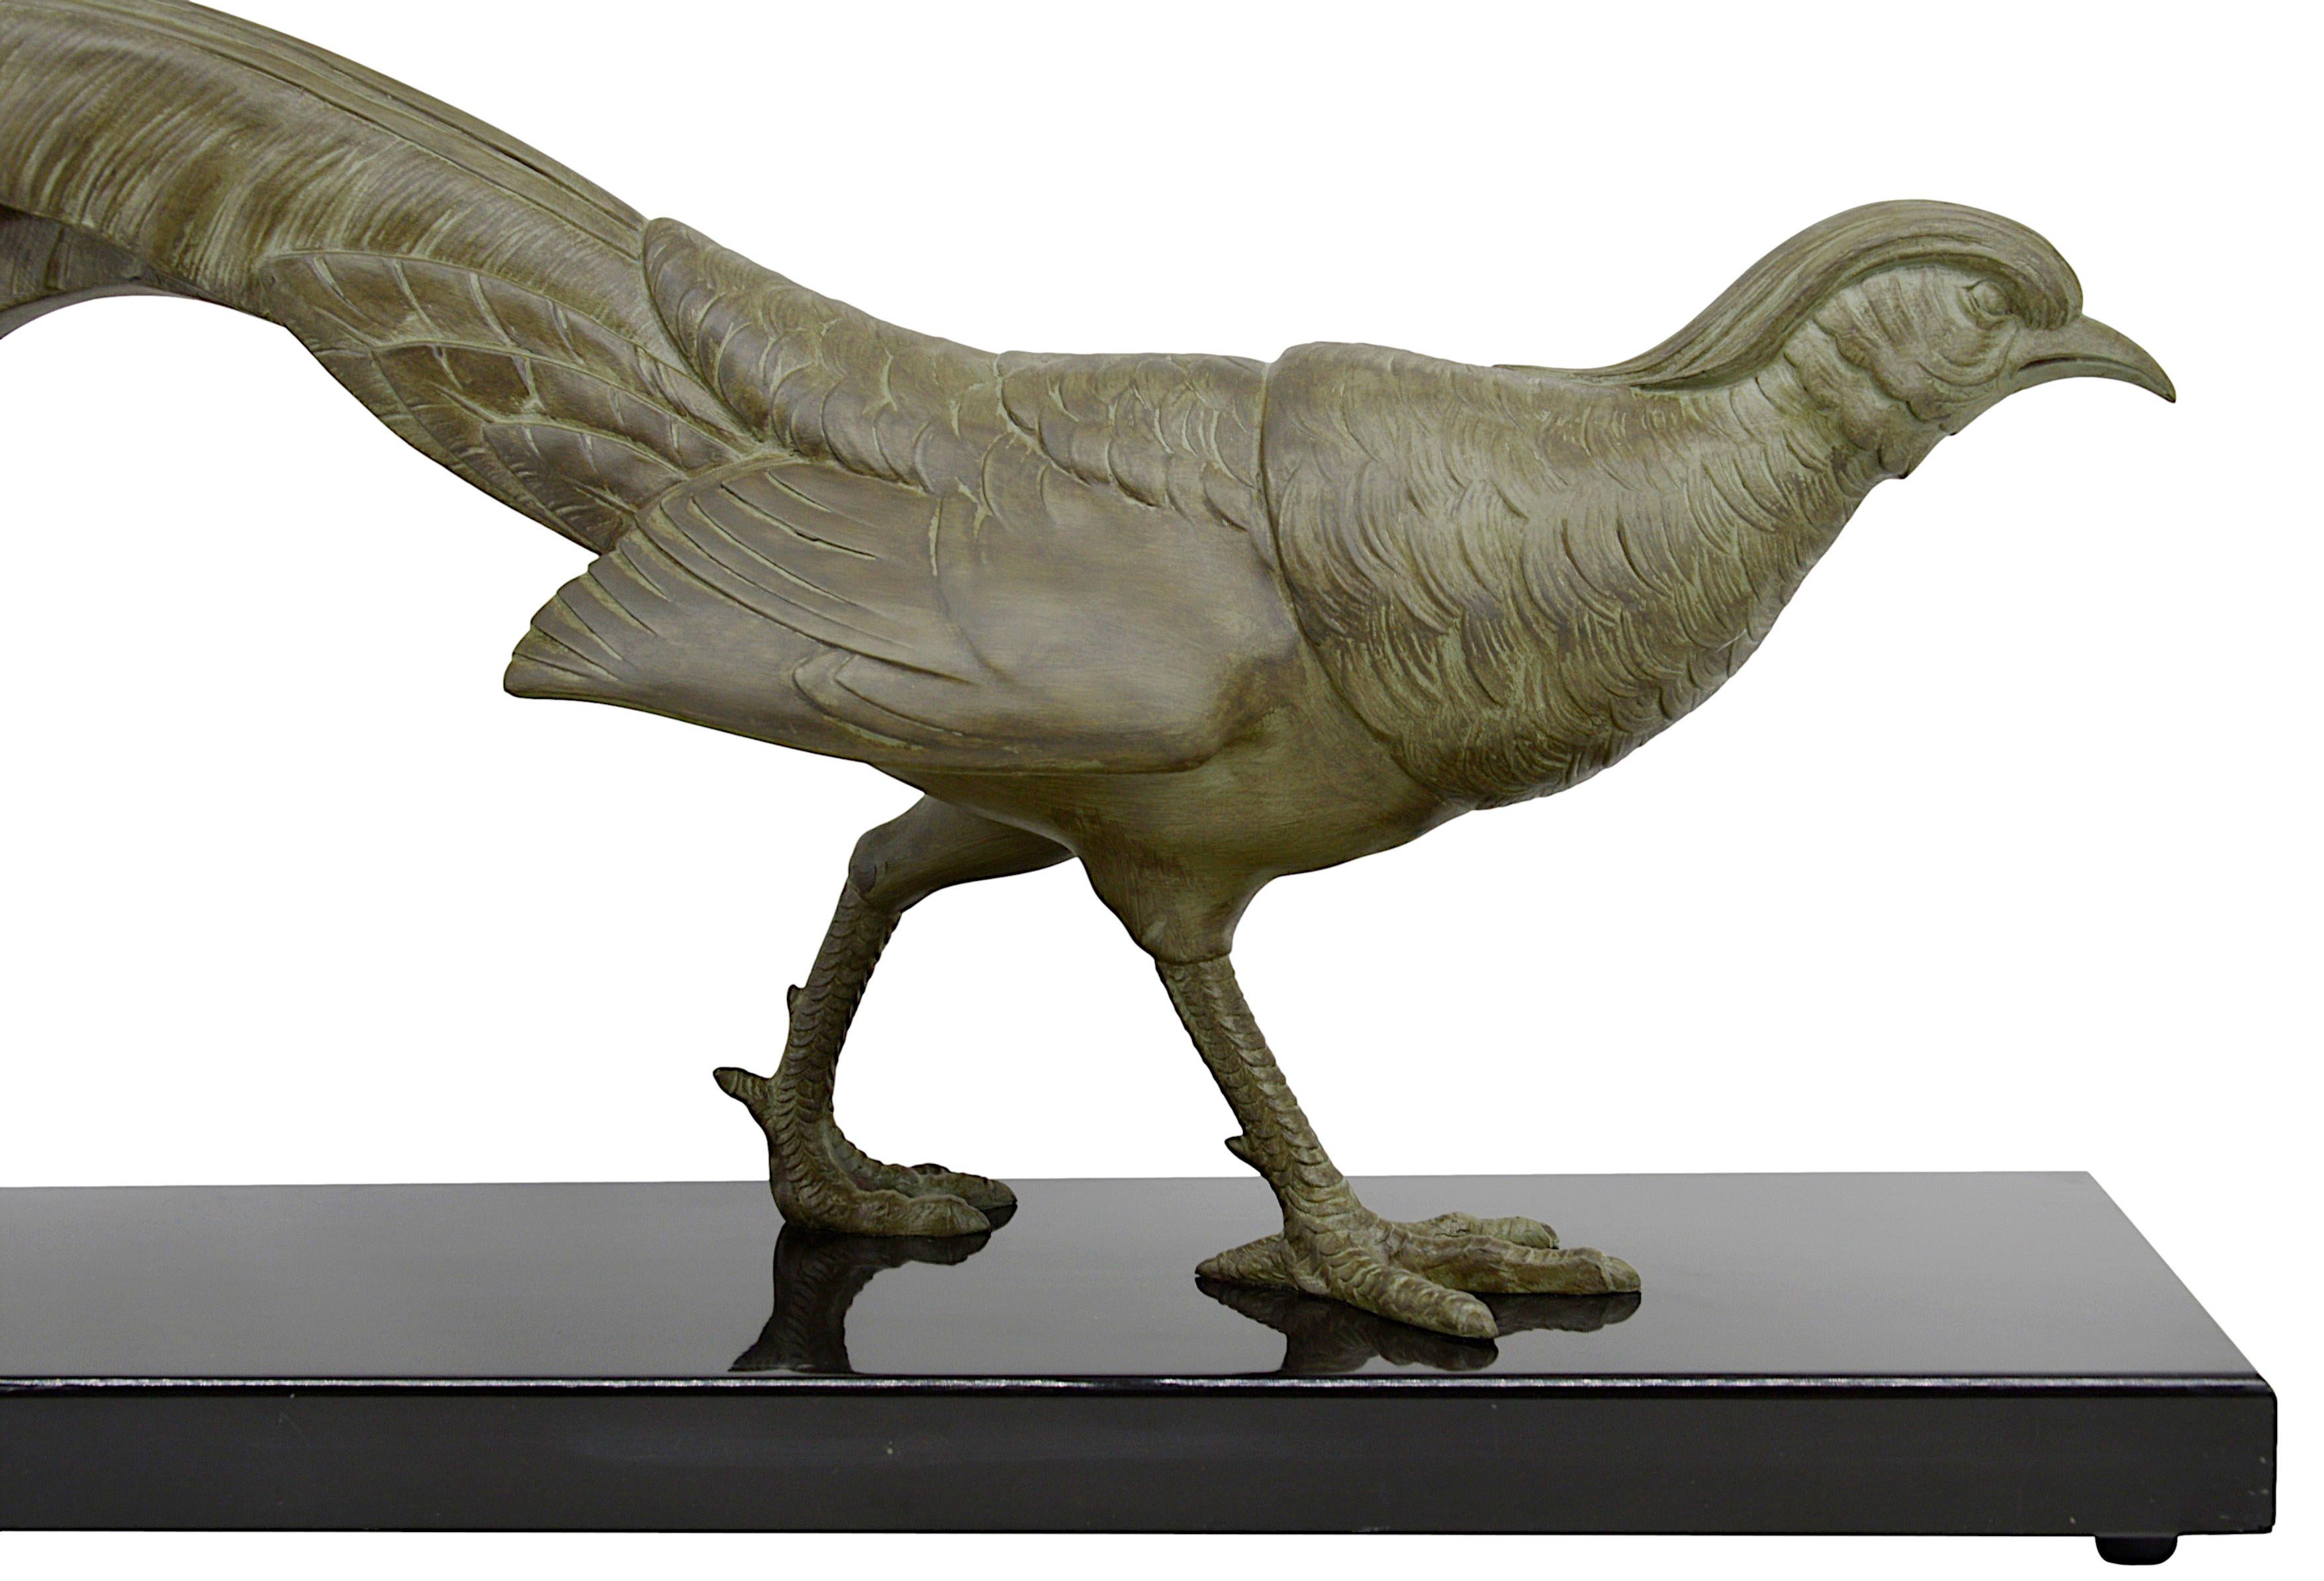 Large French Art Deco pheasant sculpture by LIMOUSIN (Paris), France, ca.1930. Cold-painted spelter marble. Important sculpture ! Width: 29.5